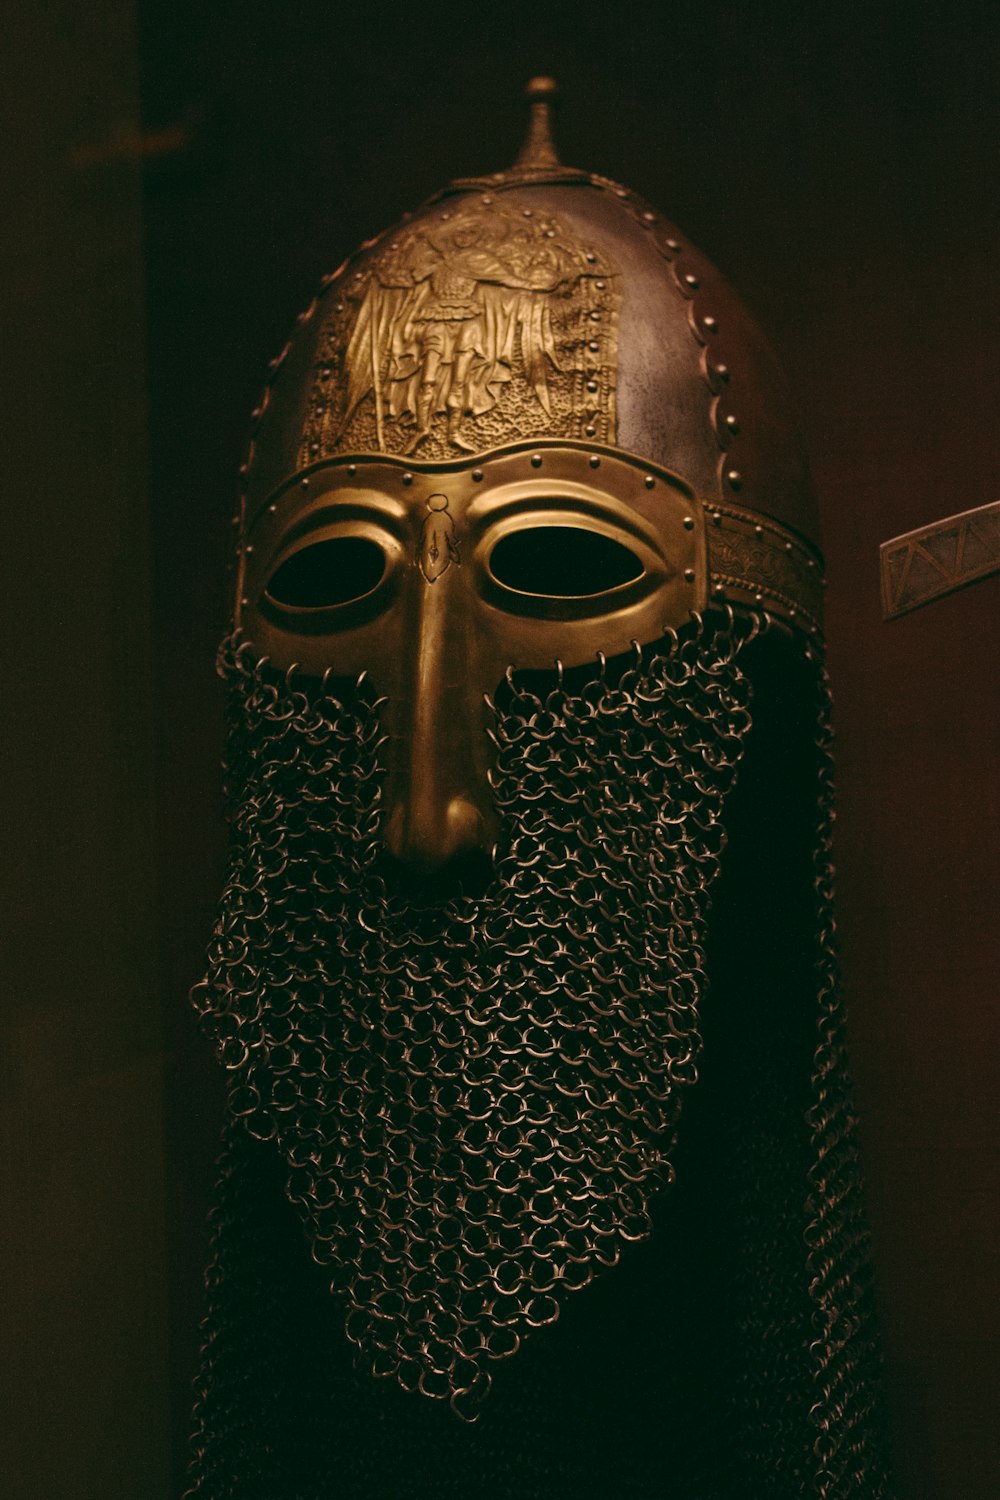 a bronze helmet with chains and a chain around it